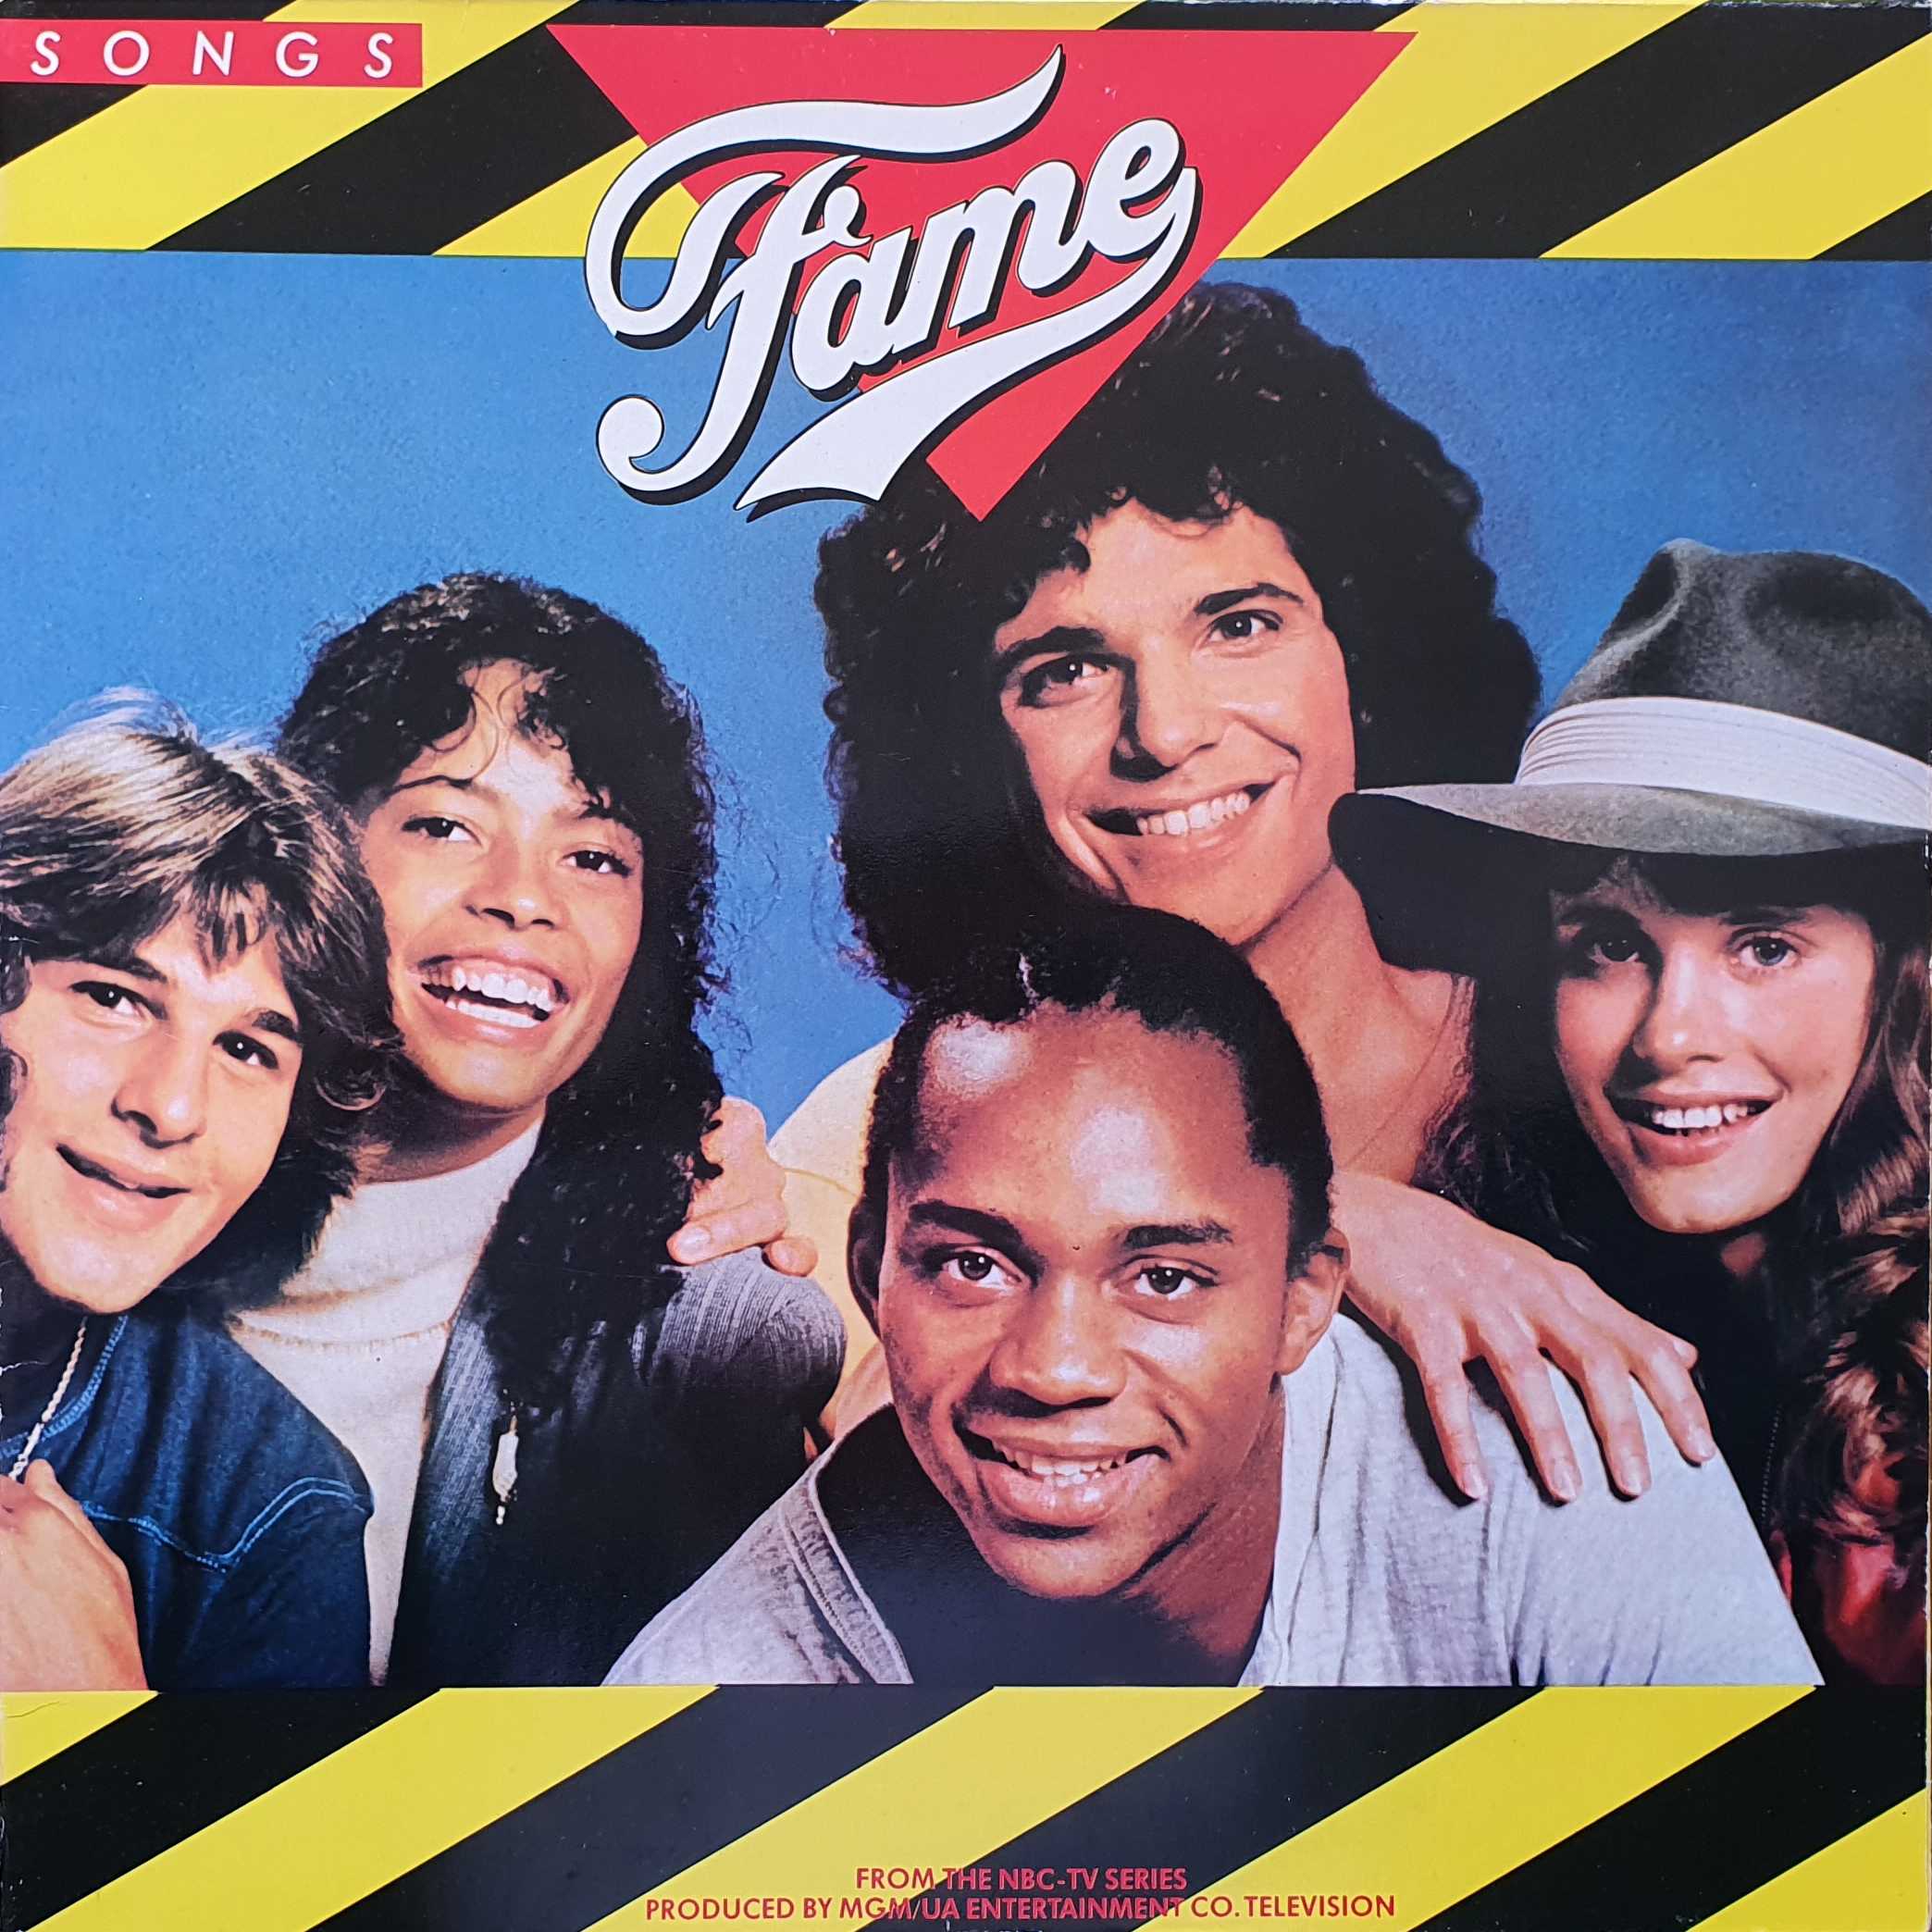 Picture of The kids from fame by artist Various from the BBC albums - Records and Tapes library